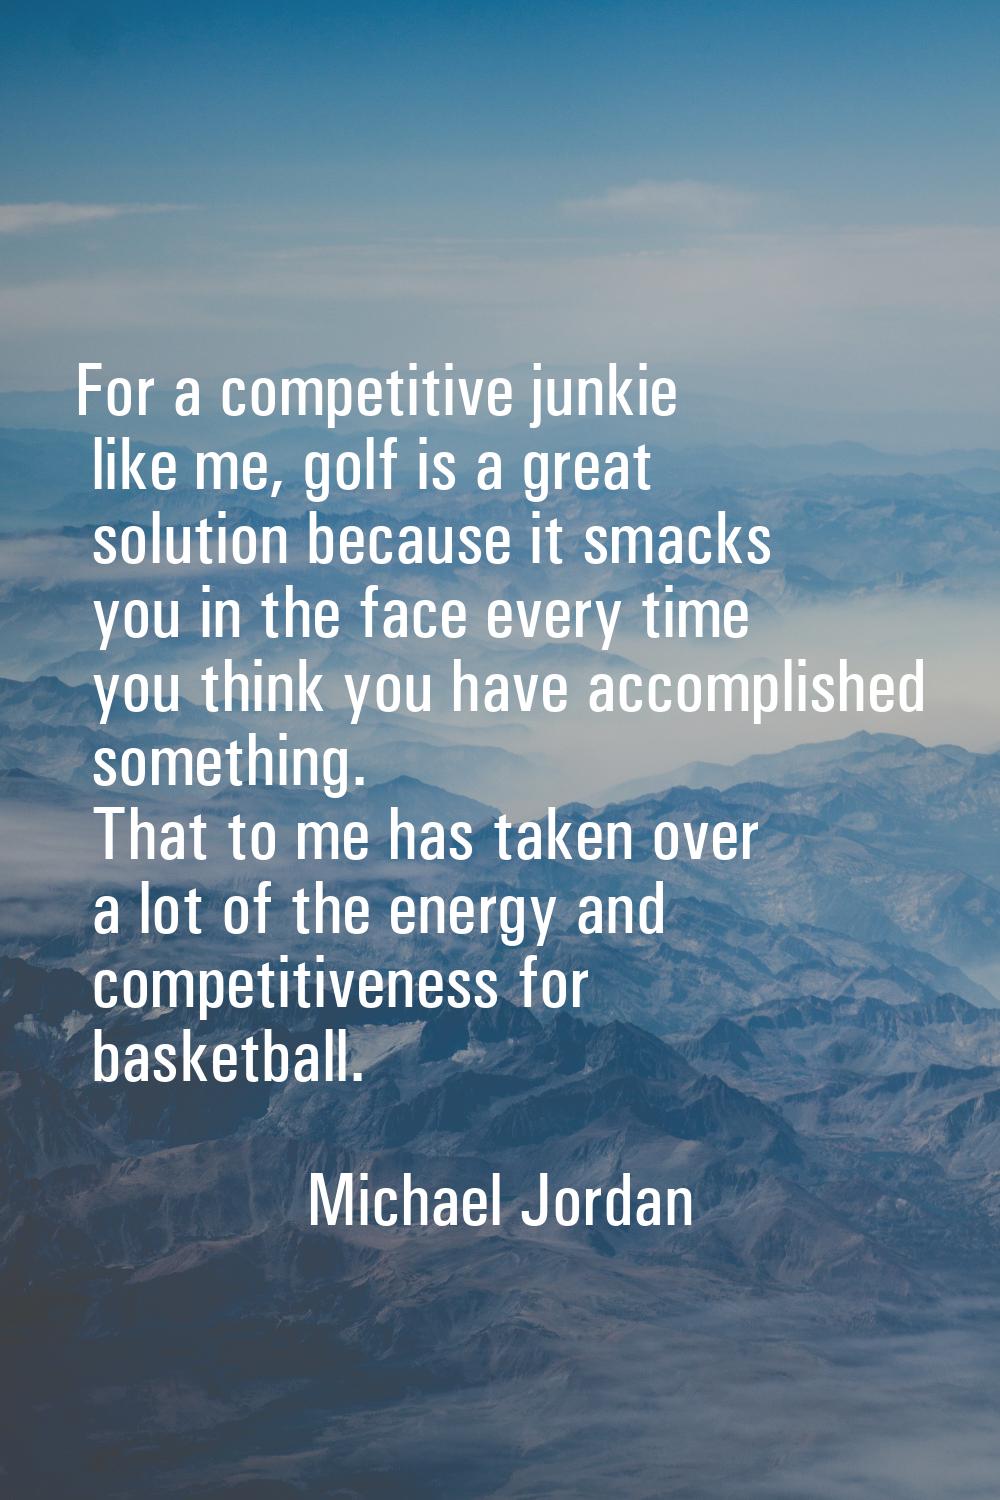 For a competitive junkie like me, golf is a great solution because it smacks you in the face every 